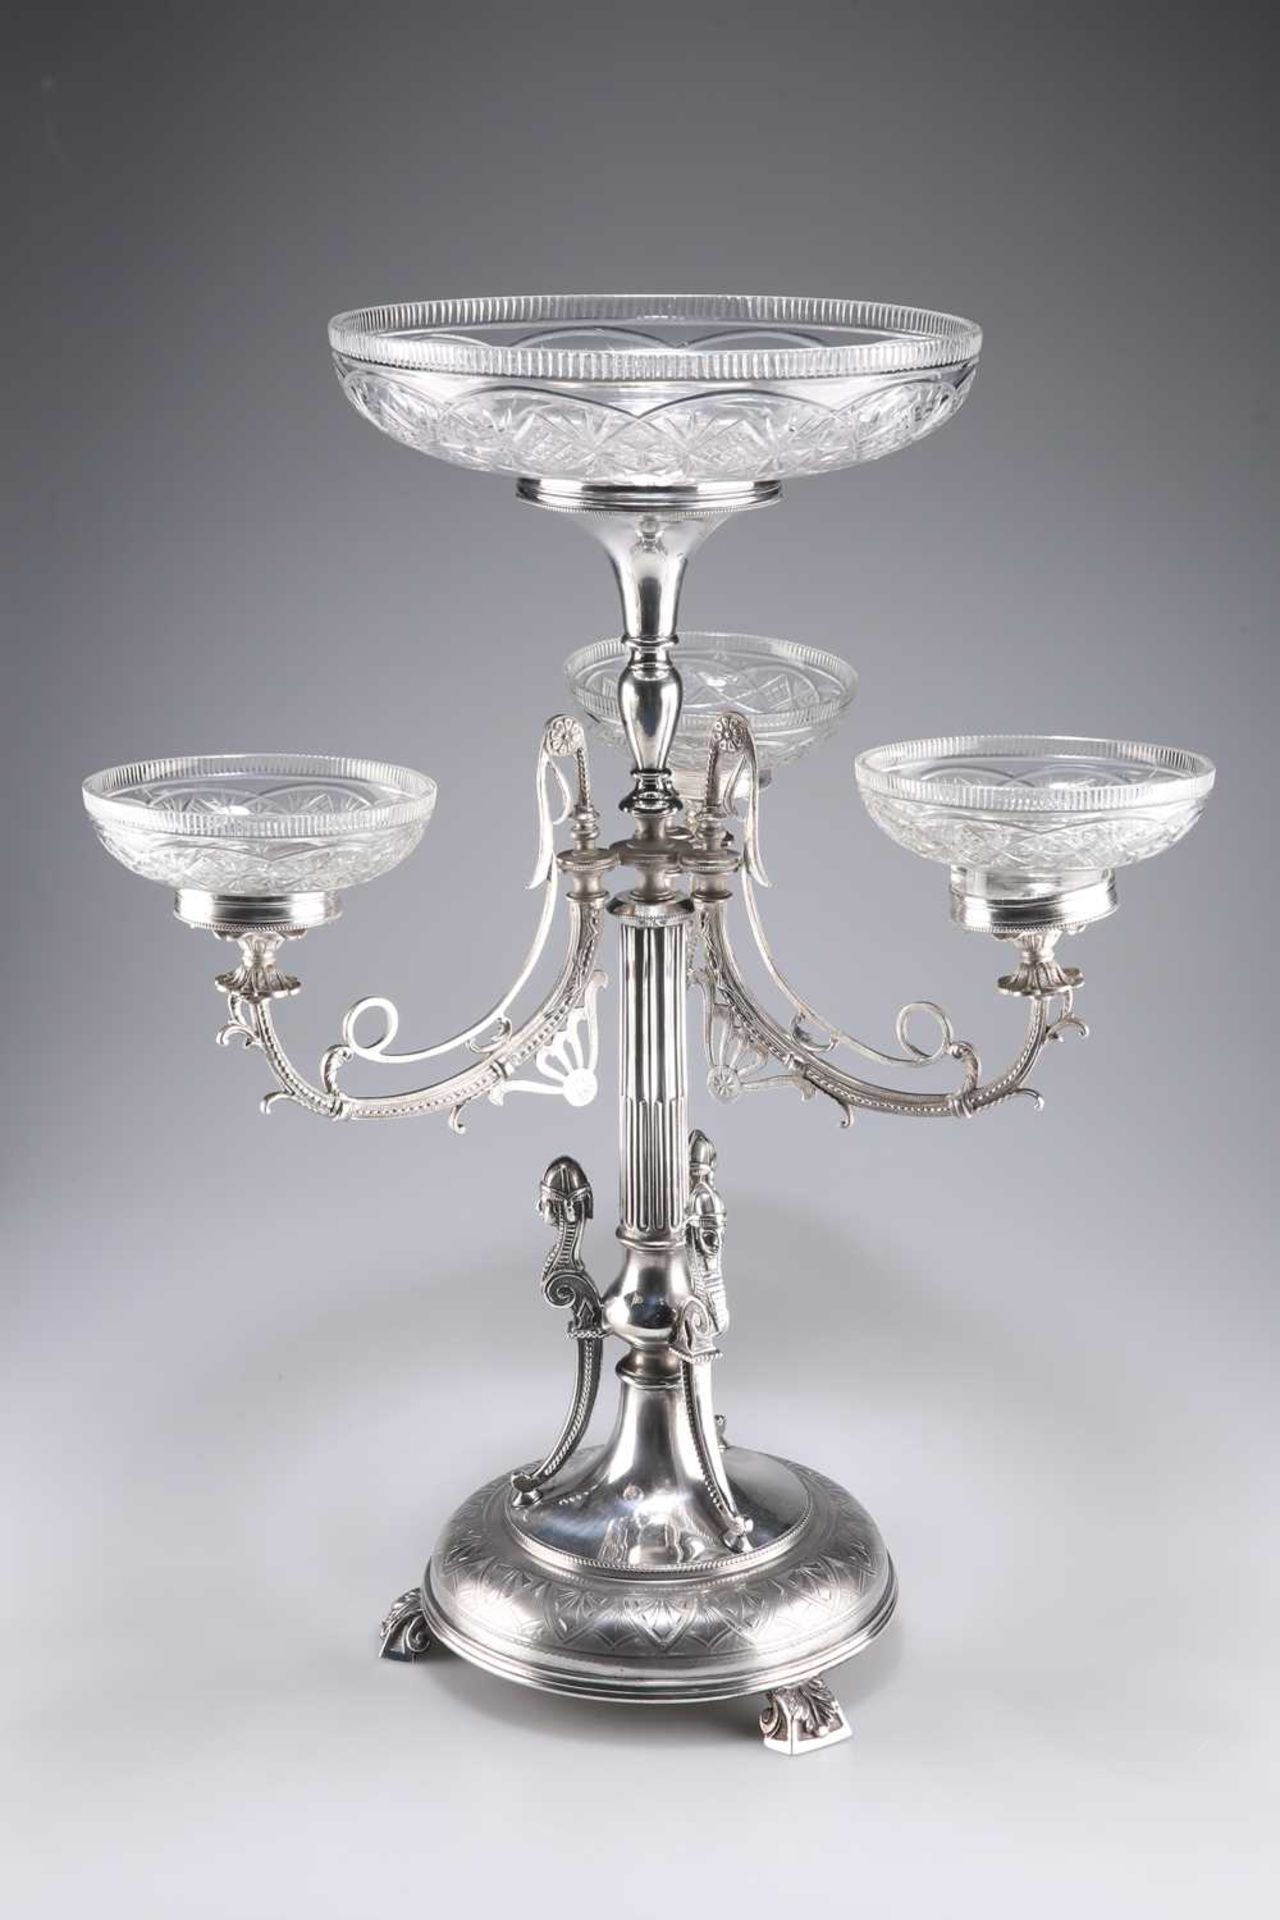 AN ORNATE EARLY 20TH CENTURY SILVER-PLATE CENTREPIECE - Image 2 of 3